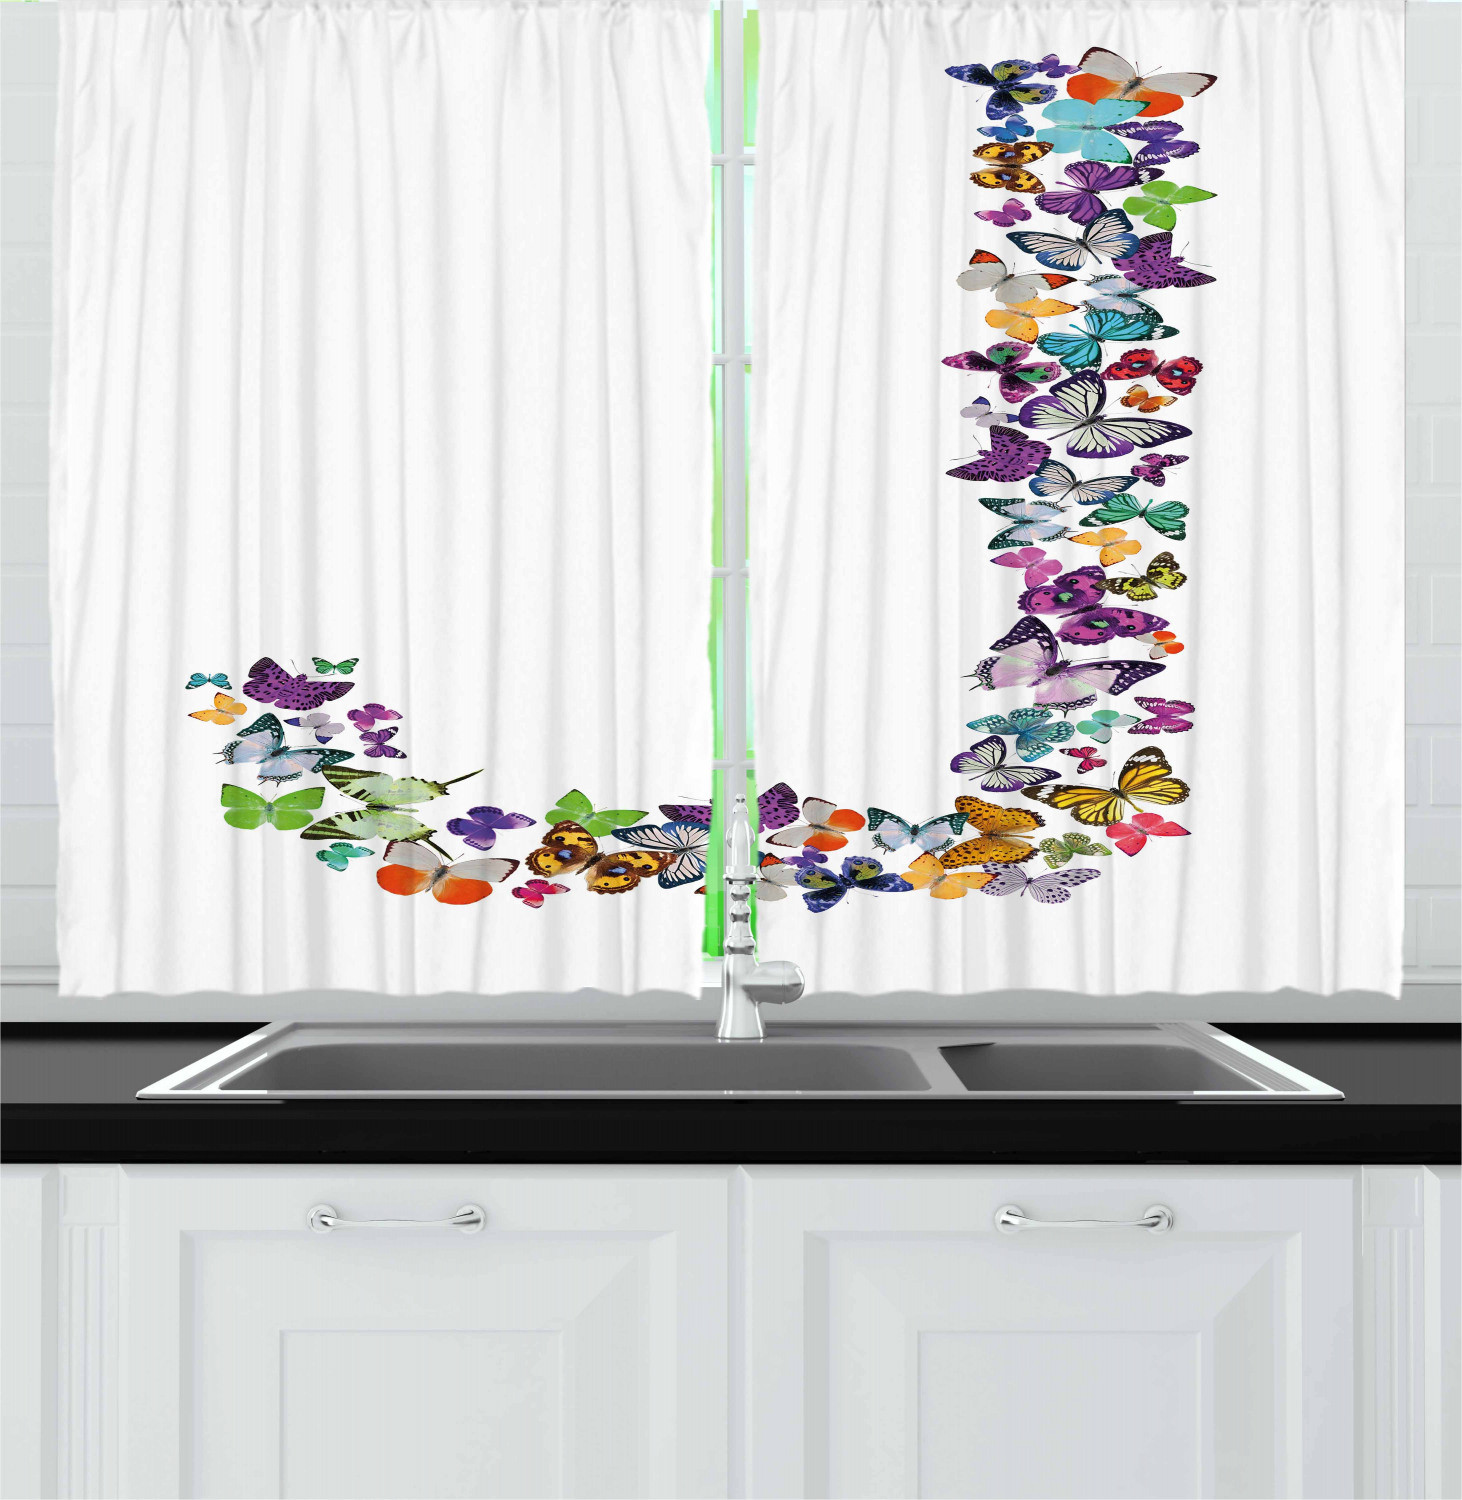 Butterfly Kitchen Curtains
 Butterfly Letters Kitchen Curtains 2 Panel Set Window